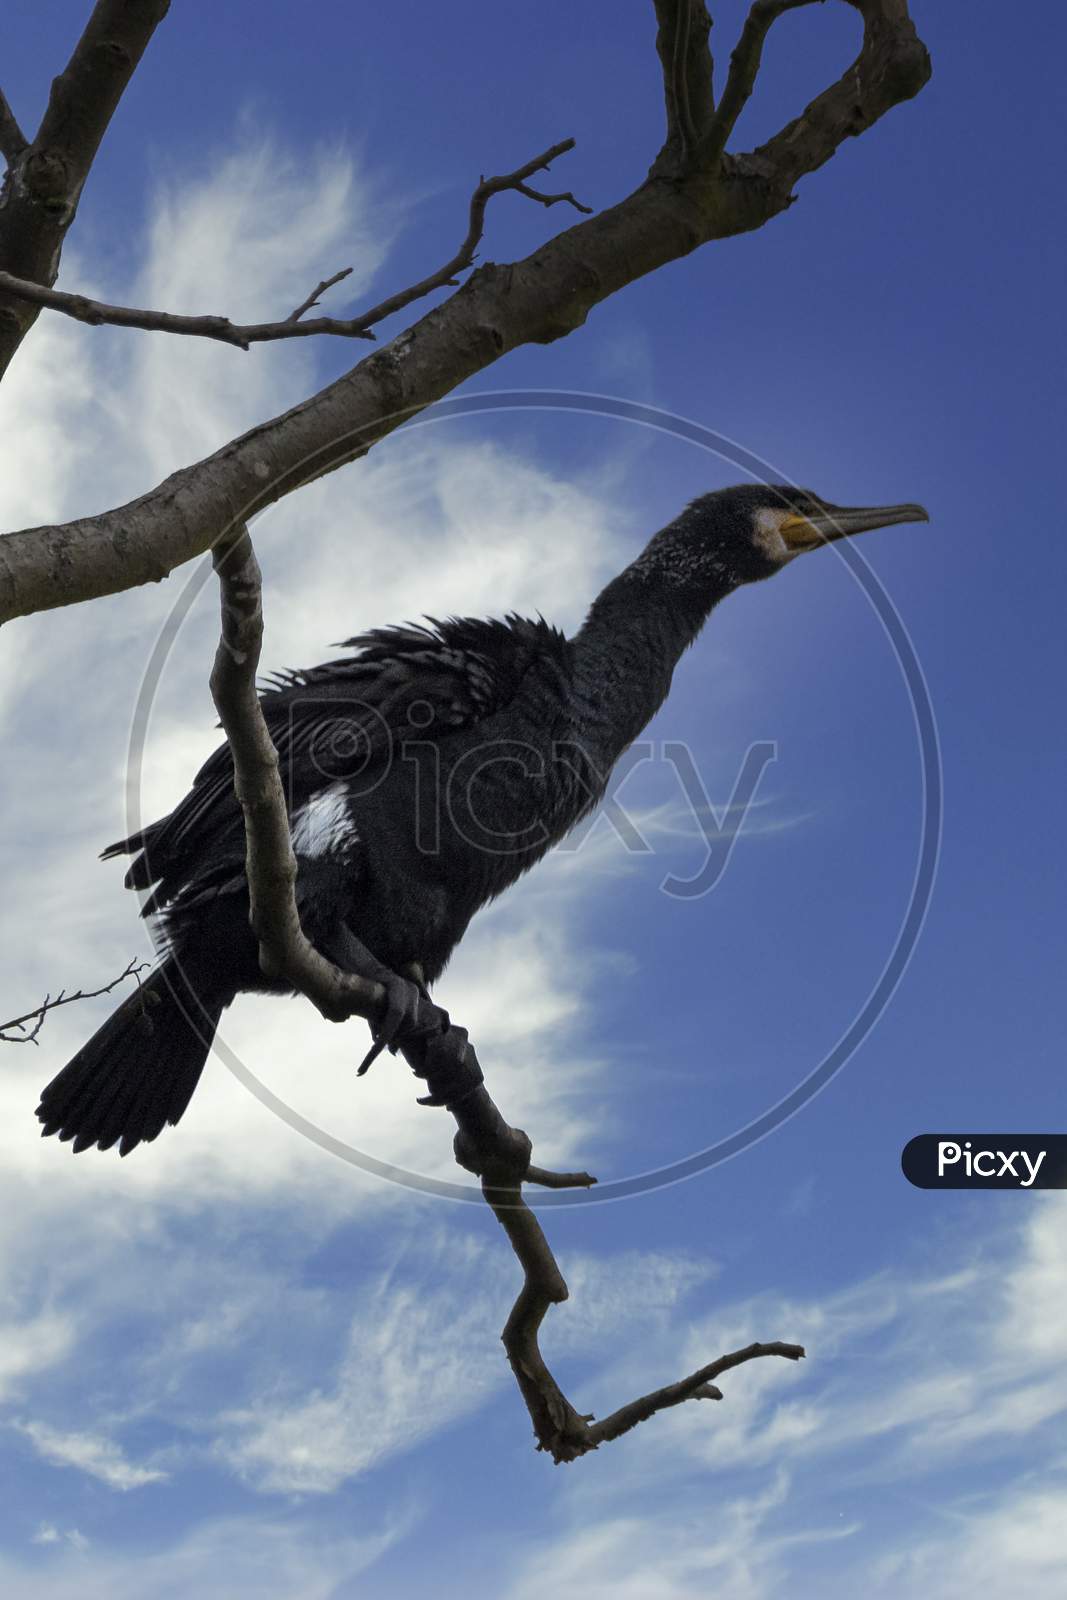 A great black cormorant sitting on a tree at the Mönchbruch natural reserve next to Frankfurt, Germany at a sunny day in winter.